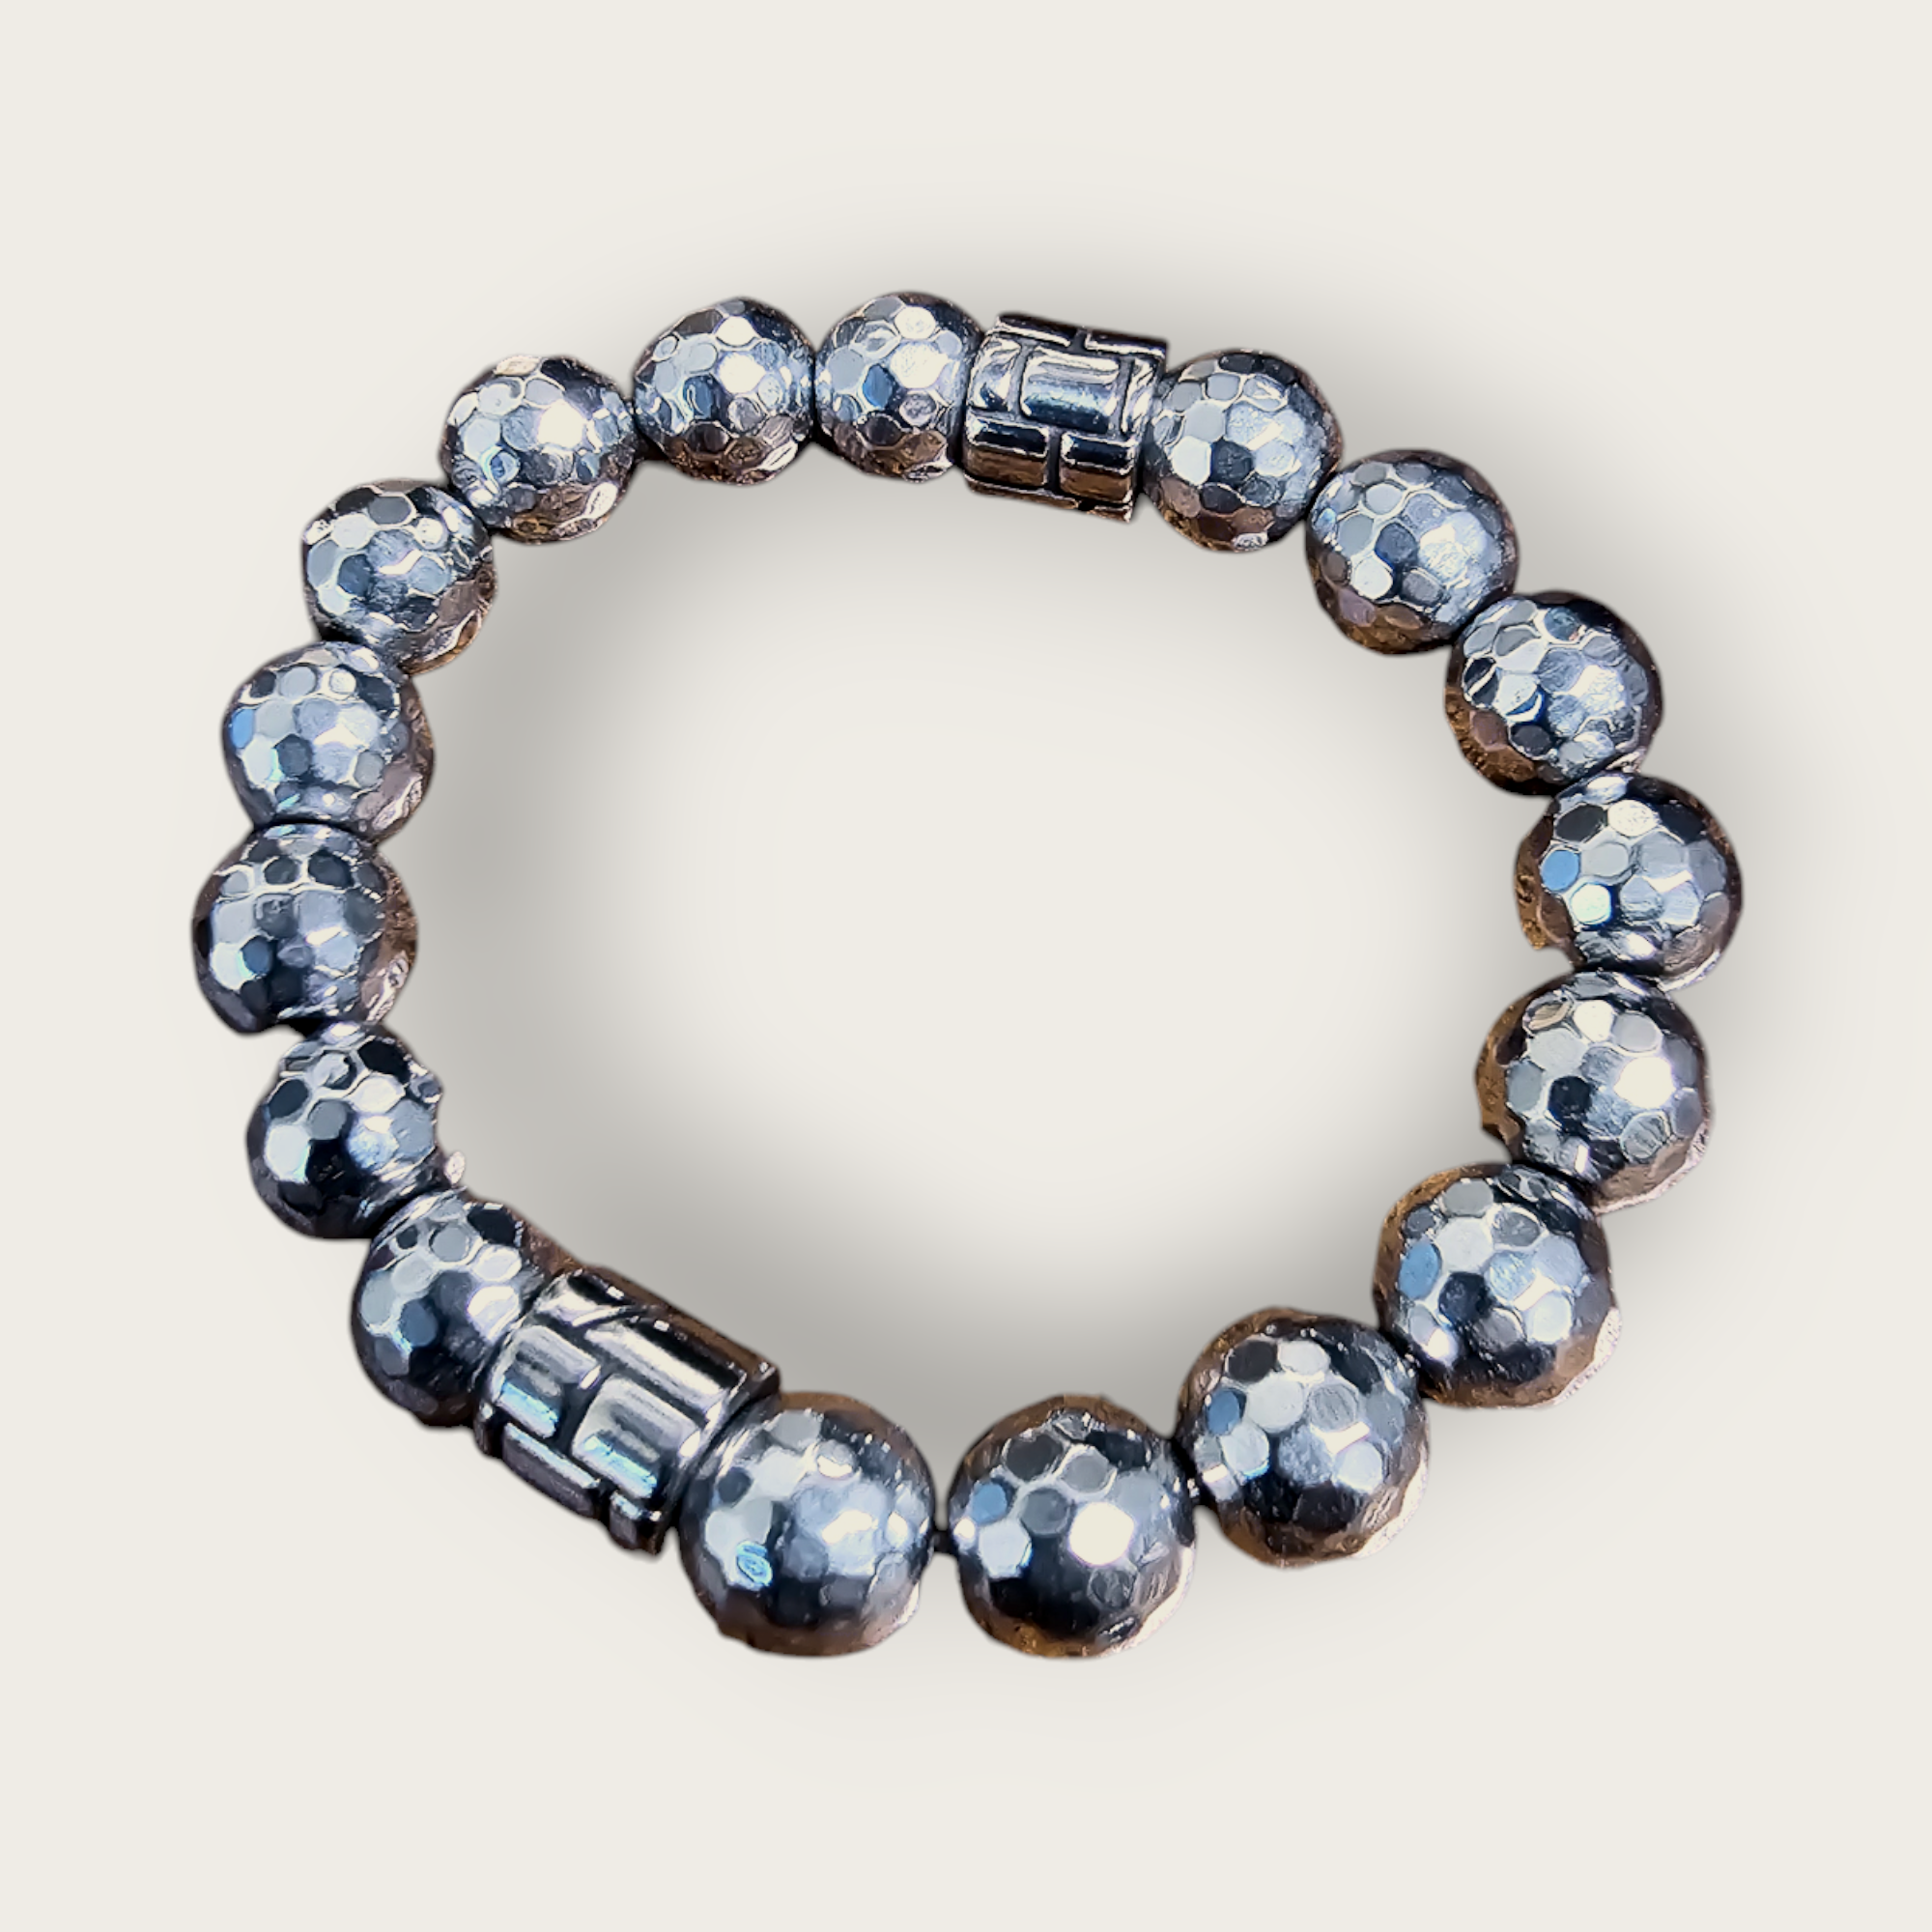 Hematite Bracelet with Stainless Steel Accent Beads